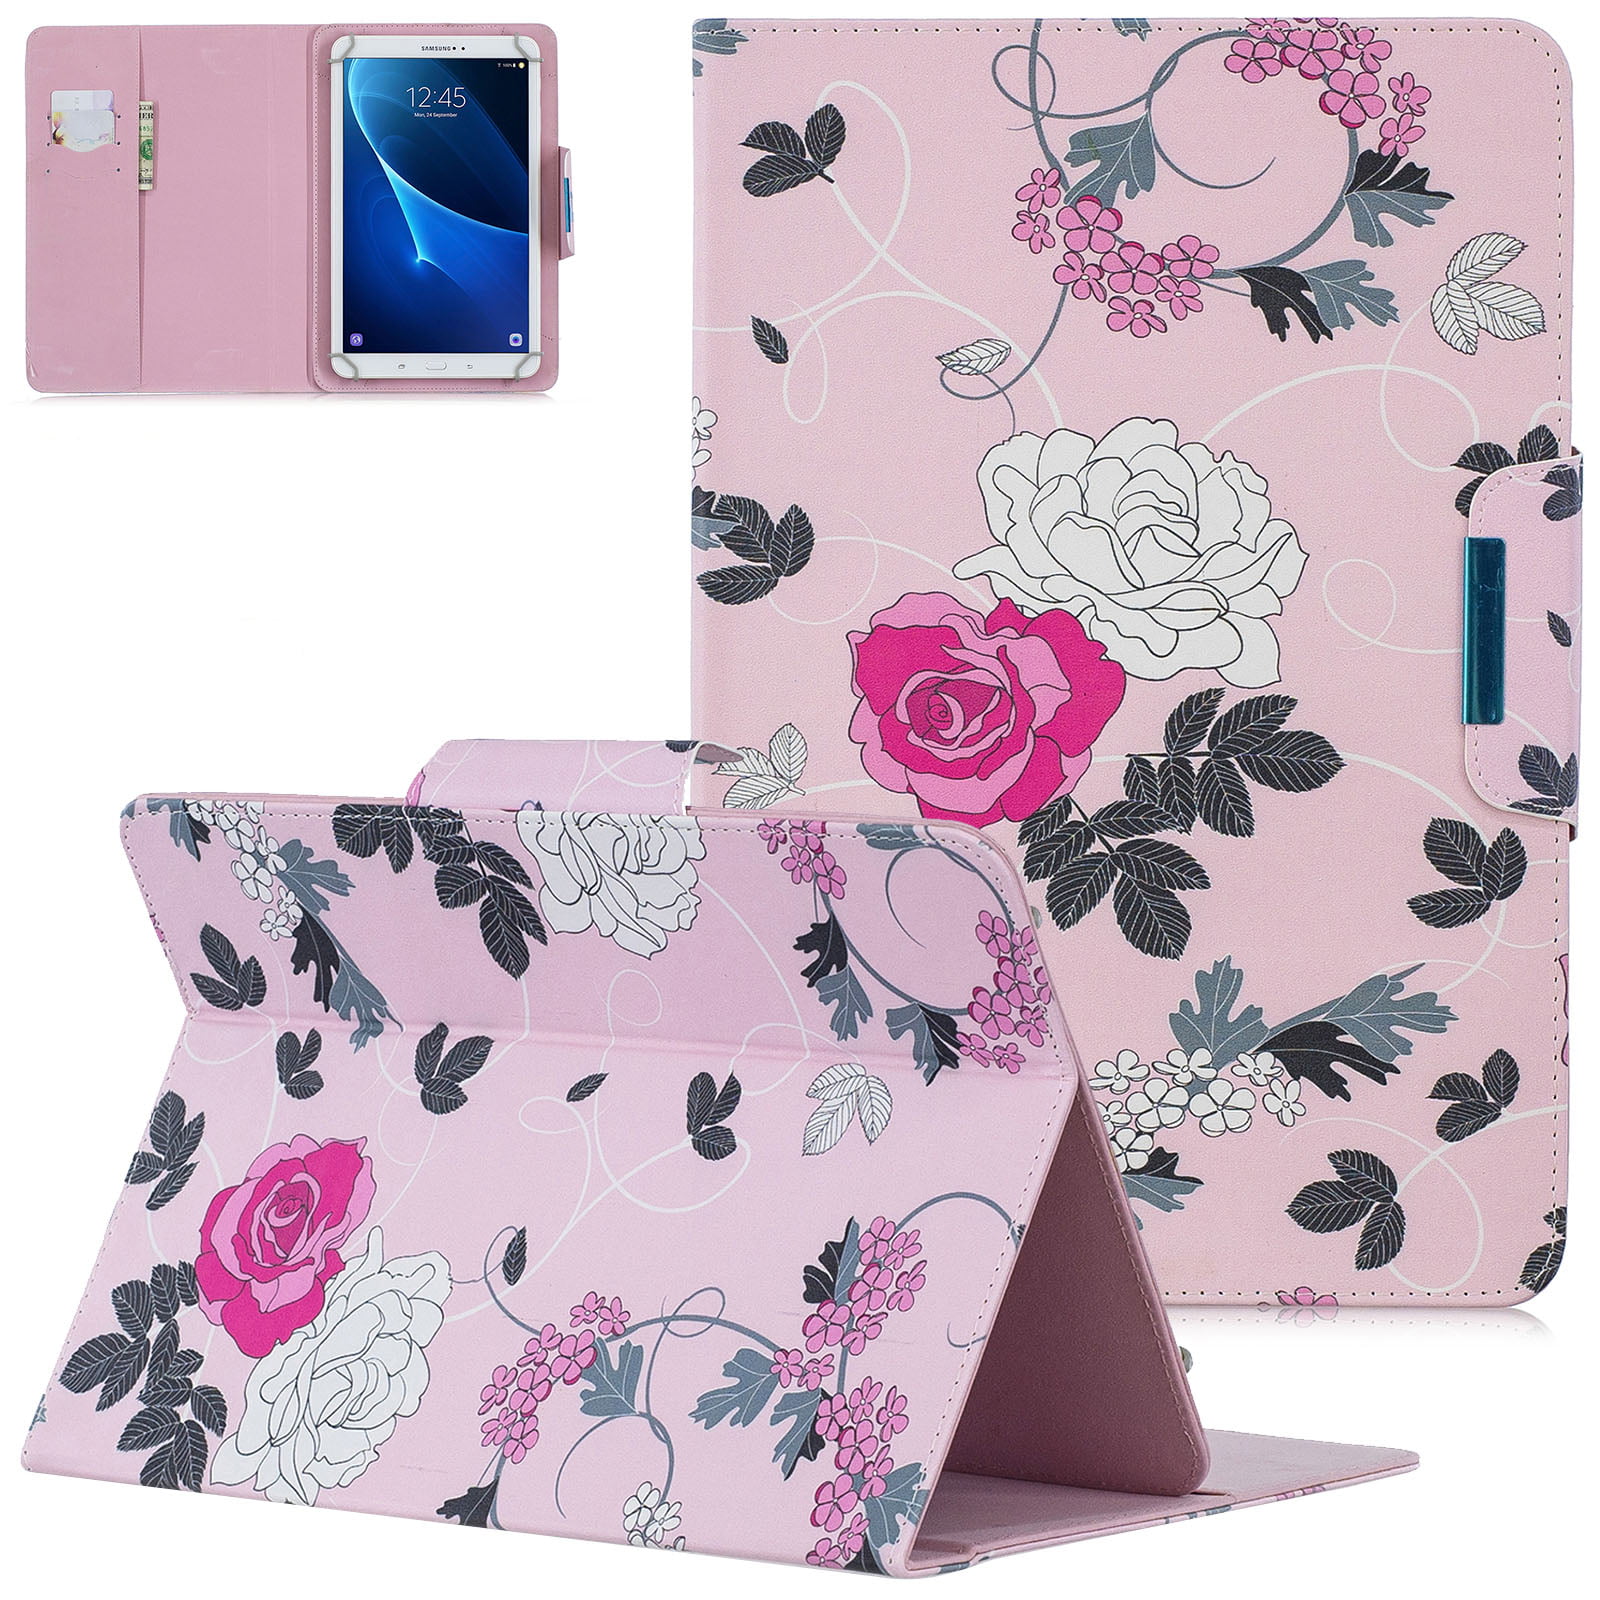 pa43 Compatible with 9-10.5 inch Universal Case with Card Slots Wallet Case Folio Flip Stand Cover Case for Samsung Galaxy Tab S4 10.5/Tab A 10.5/ Tab A 10.1/Tab S3 9.7/Tab 4-10.1/Tab E 9.6 